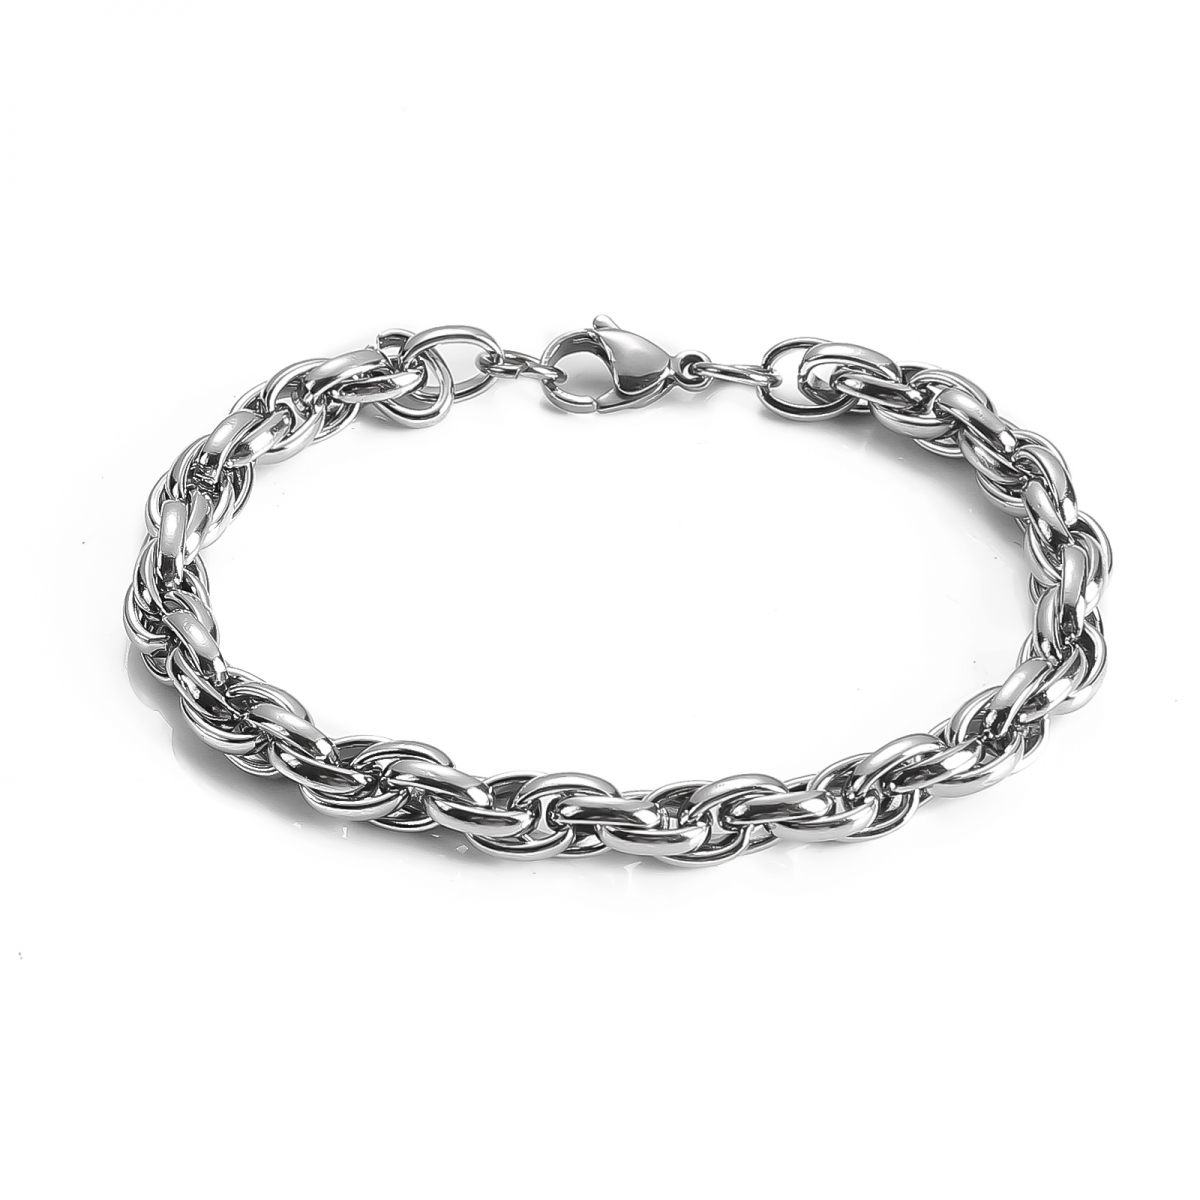 King Chain Necklace US$2.2/PC-NORSECOLLECTION- Viking Jewelry,Viking Necklace,Viking Bracelet,Viking Rings,Viking Mugs,Viking Accessories,Viking Crafts